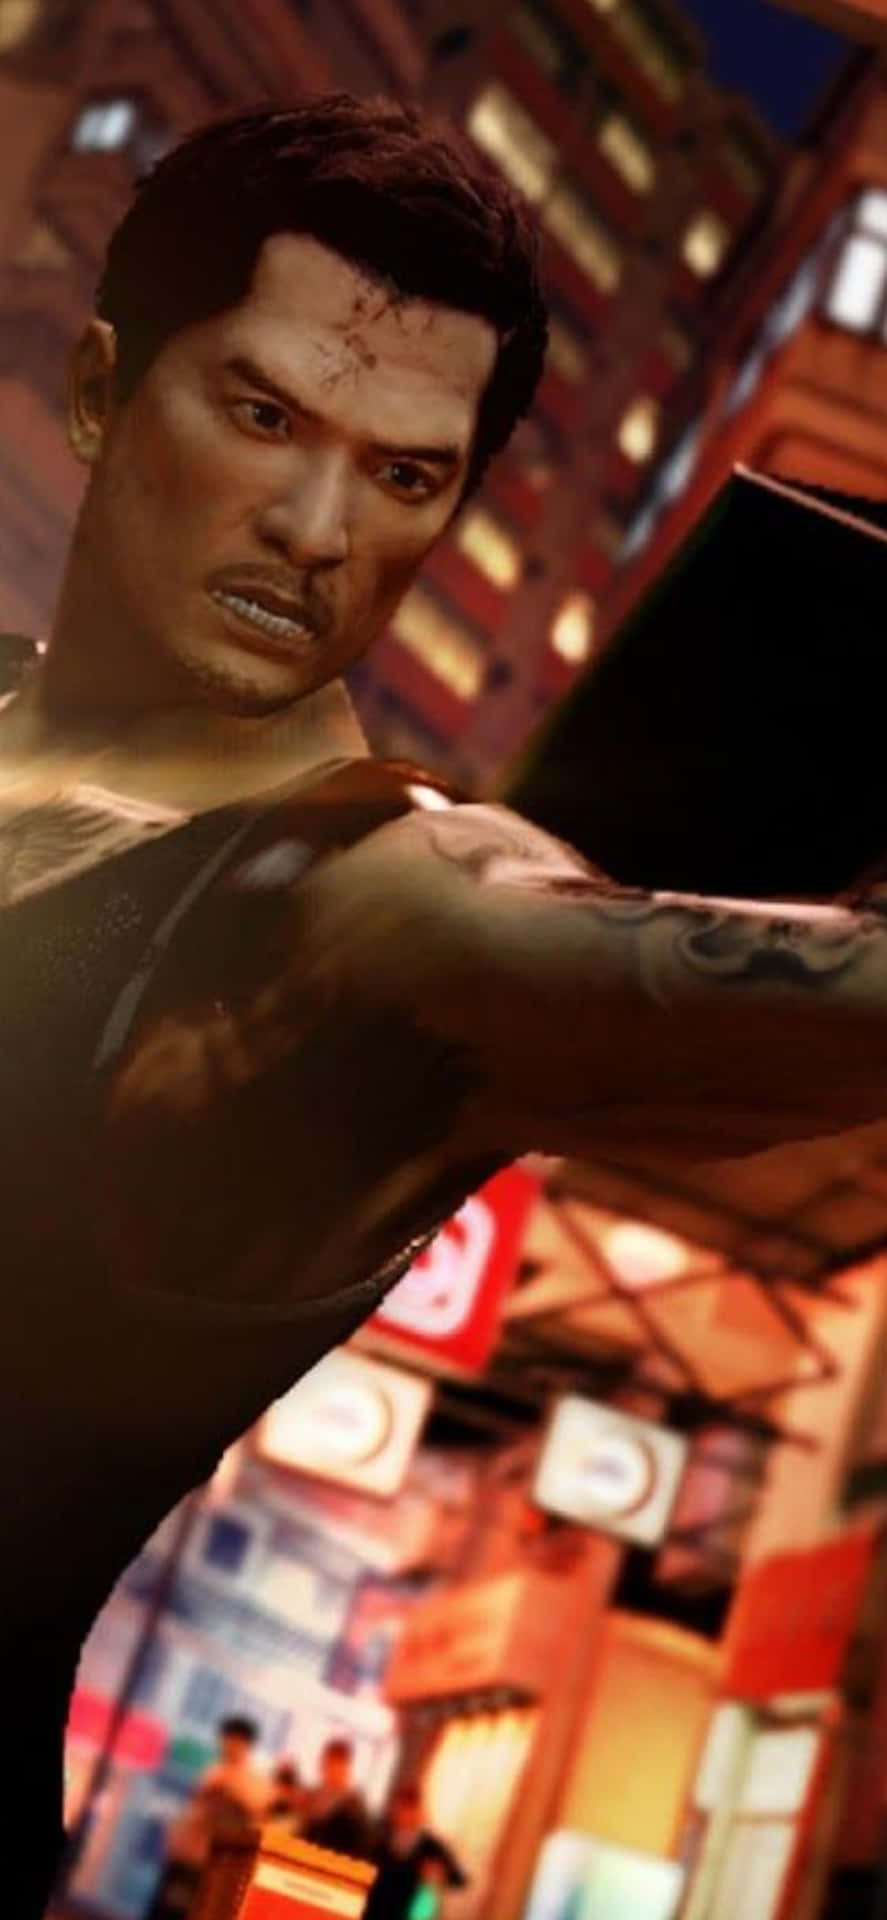 Iphone Xs Sleeping Dogs Straight Punch Background